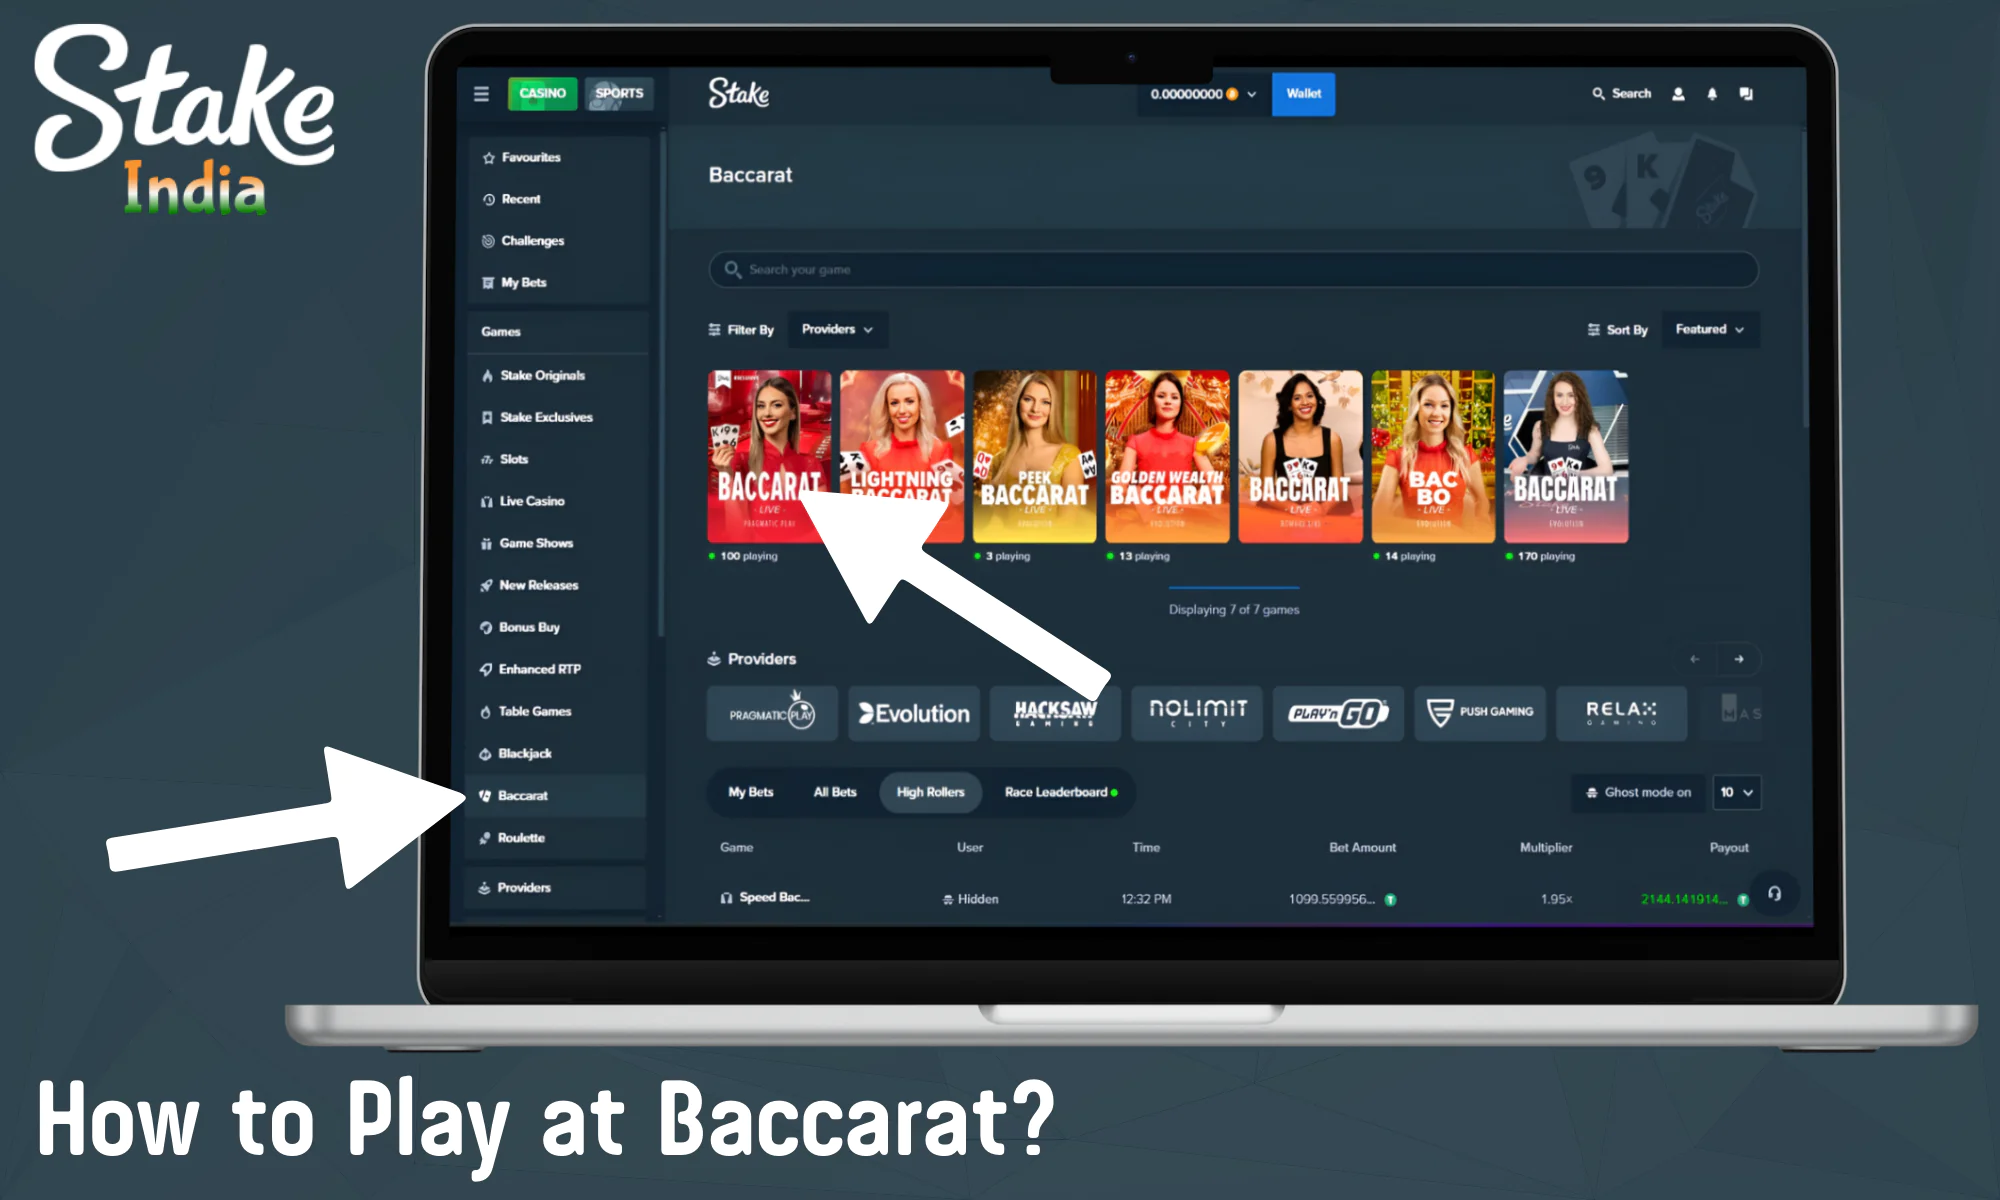 Step-by-step instructions on how to start playing Baccarat at Stake